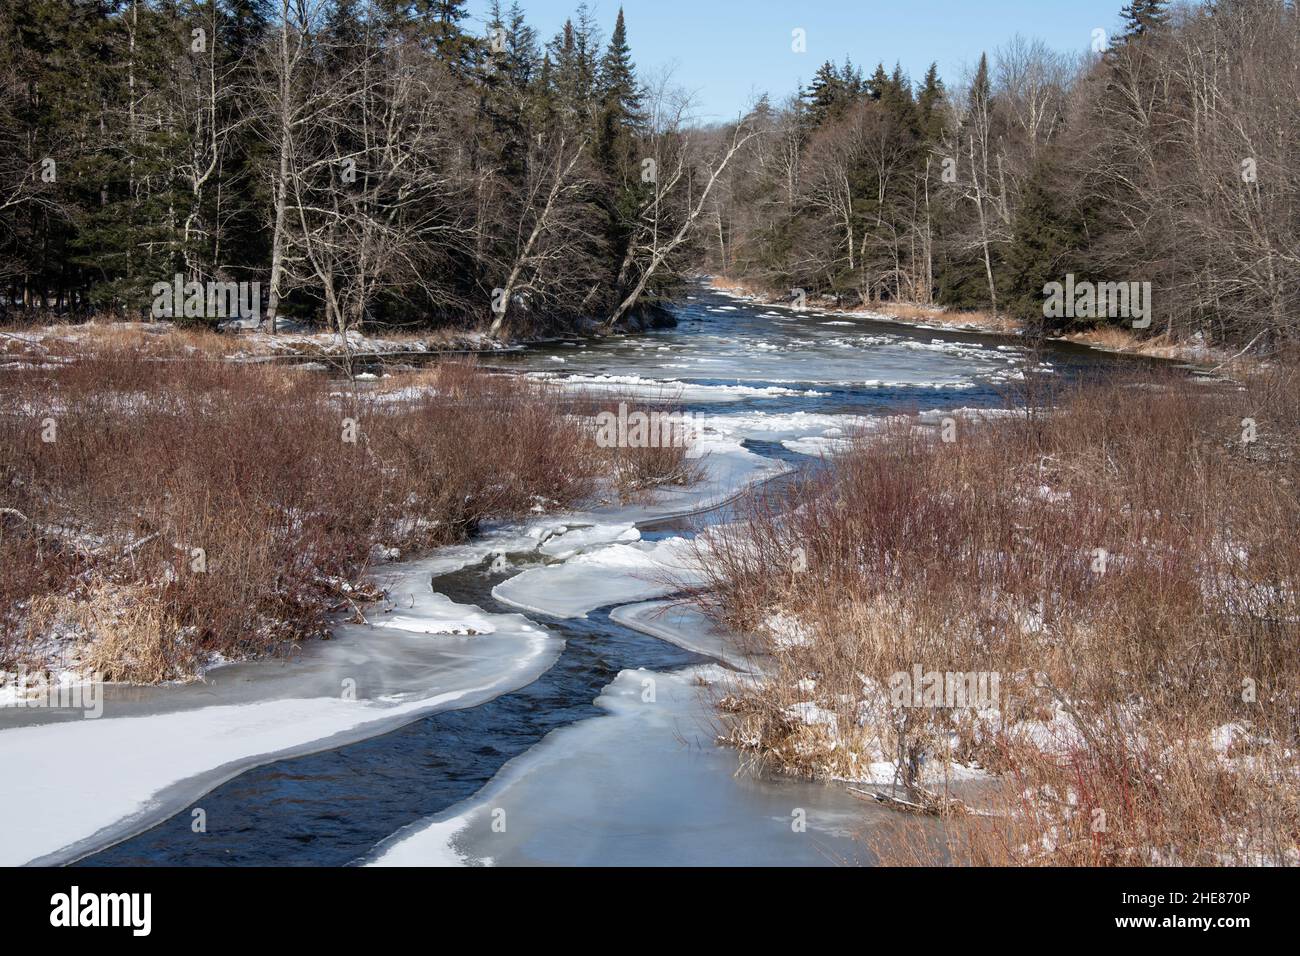 A view of the Sacandaga River in the Adirondack Mountains in winter with snow and ice on the water. Stock Photo